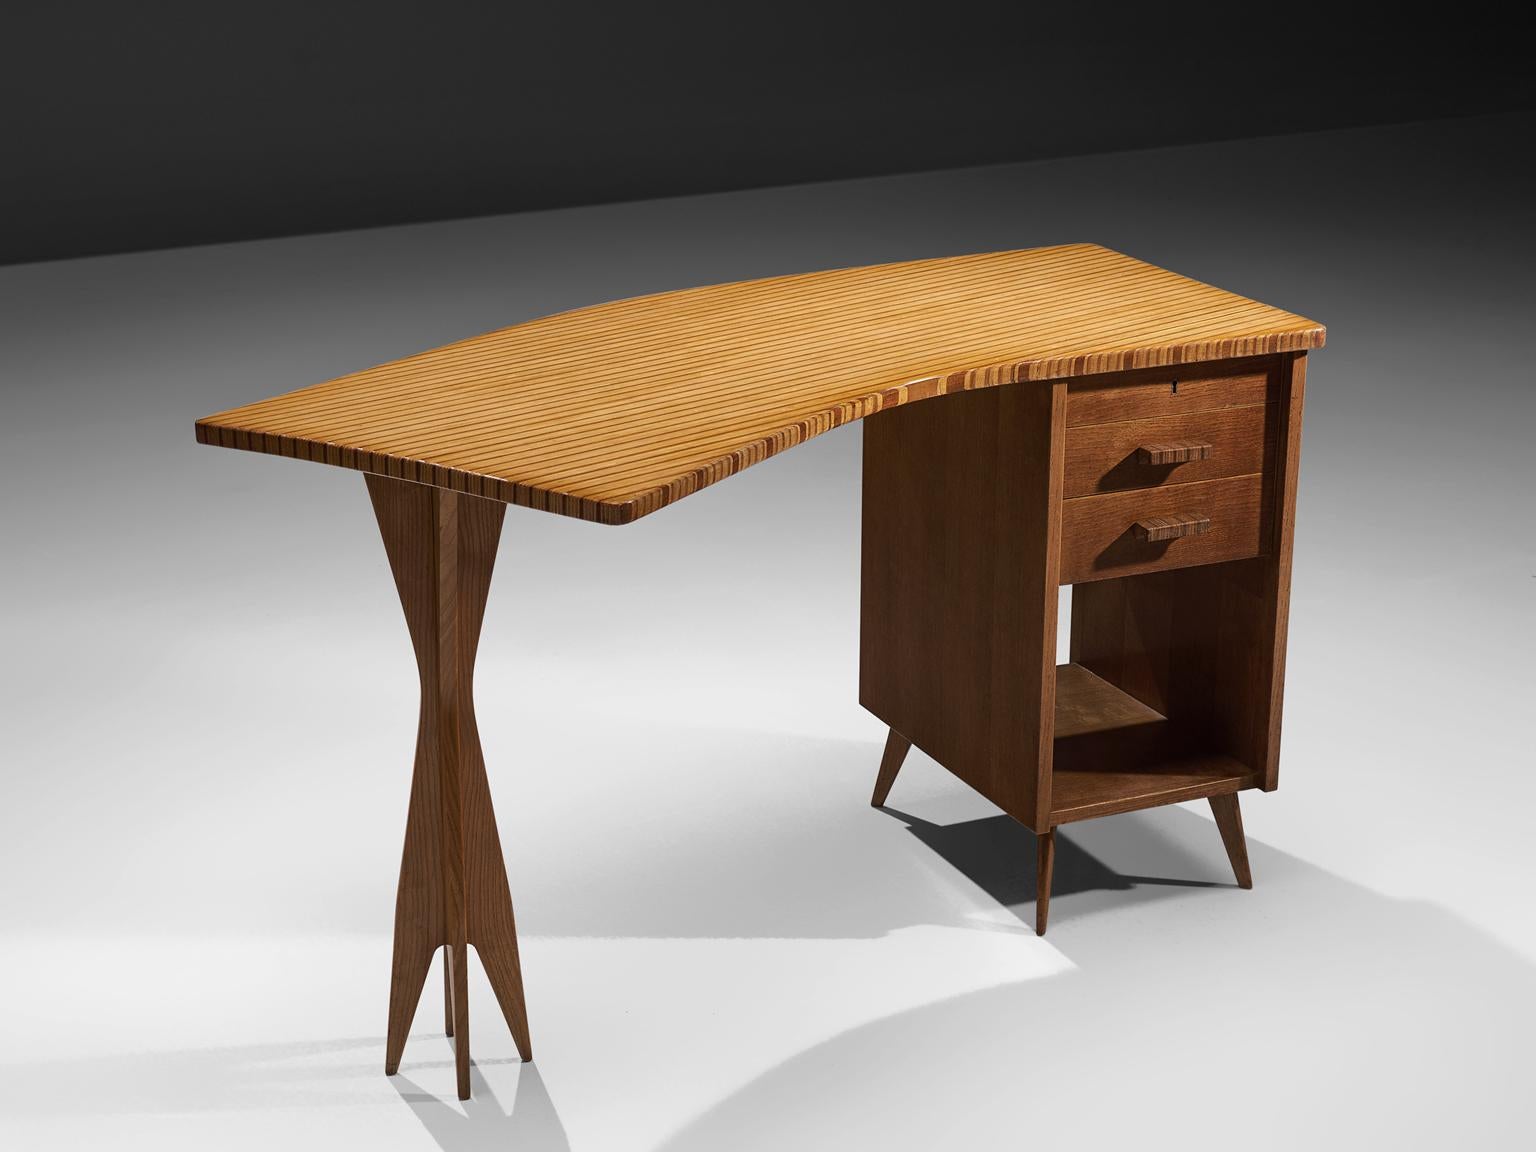 Desk and chair, elm and mahogany, Italy, circa 1950

This delicate, sculptural desk and chair are designed in Italy, circa 1950. This sculptural way of designing has a lot in common with the design of Carlo Molino and Carlo de Carli. The piece has